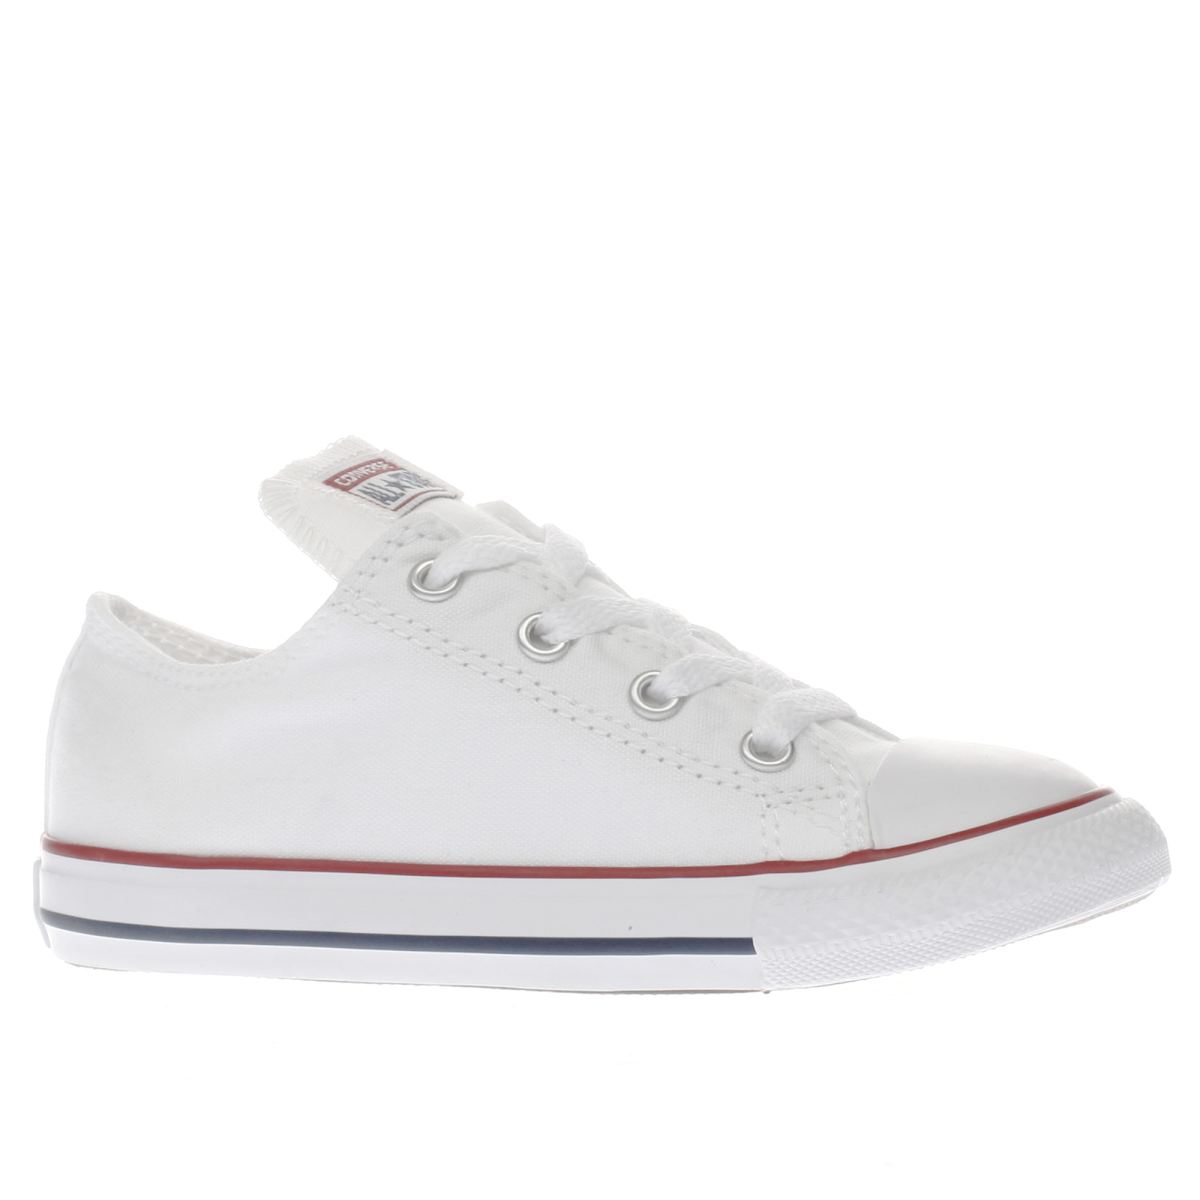 converse trainers converse white all star lo unisex toddler VOVFBYQ